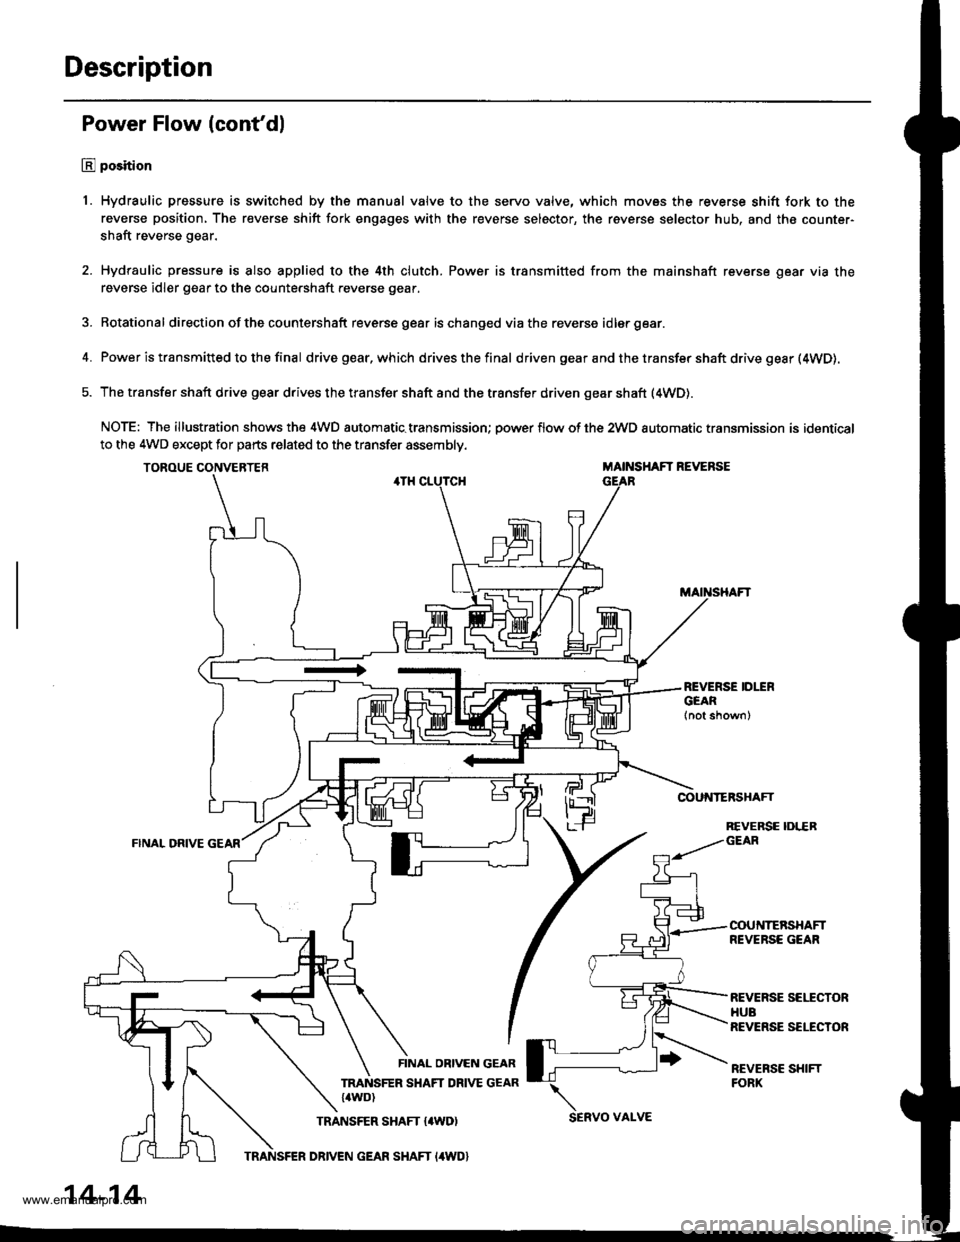 HONDA CR-V 1999 RD1-RD3 / 1.G Owners Guide 
Description
Power Flow (contdl
E position
1. Hydraulic pressure is switched by the manual valve to the servo valve, which movss the reverse shift fork to the
reverse position, The reverse shift fork